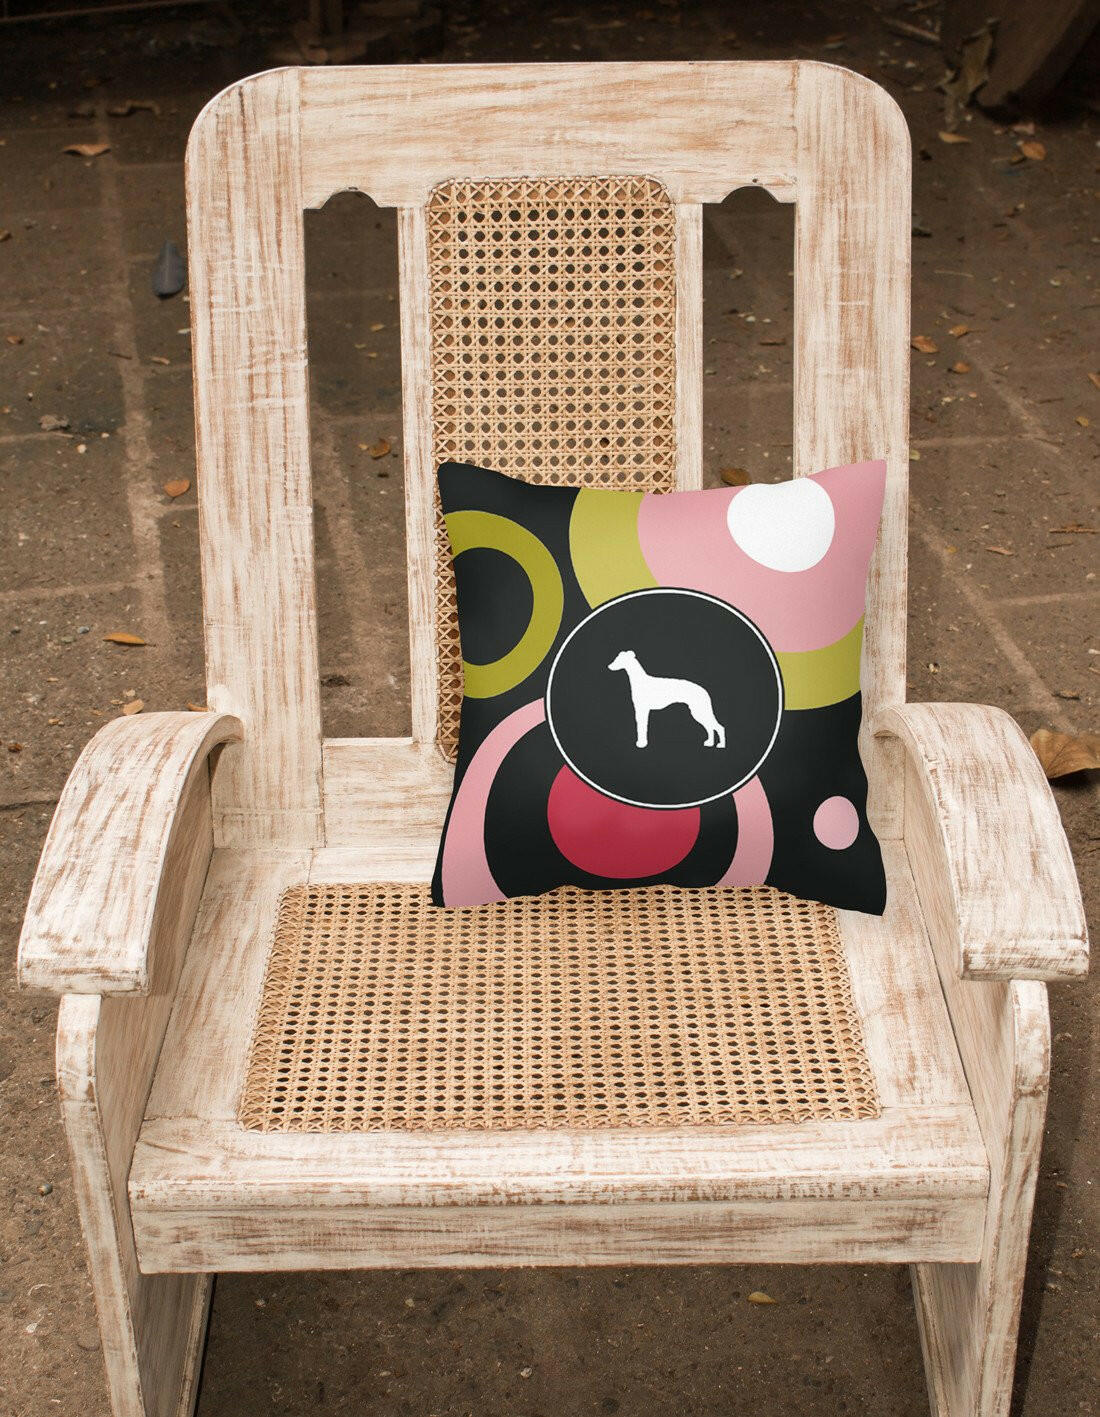 Whippet Decorative   Canvas Fabric Pillow by Caroline's Treasures